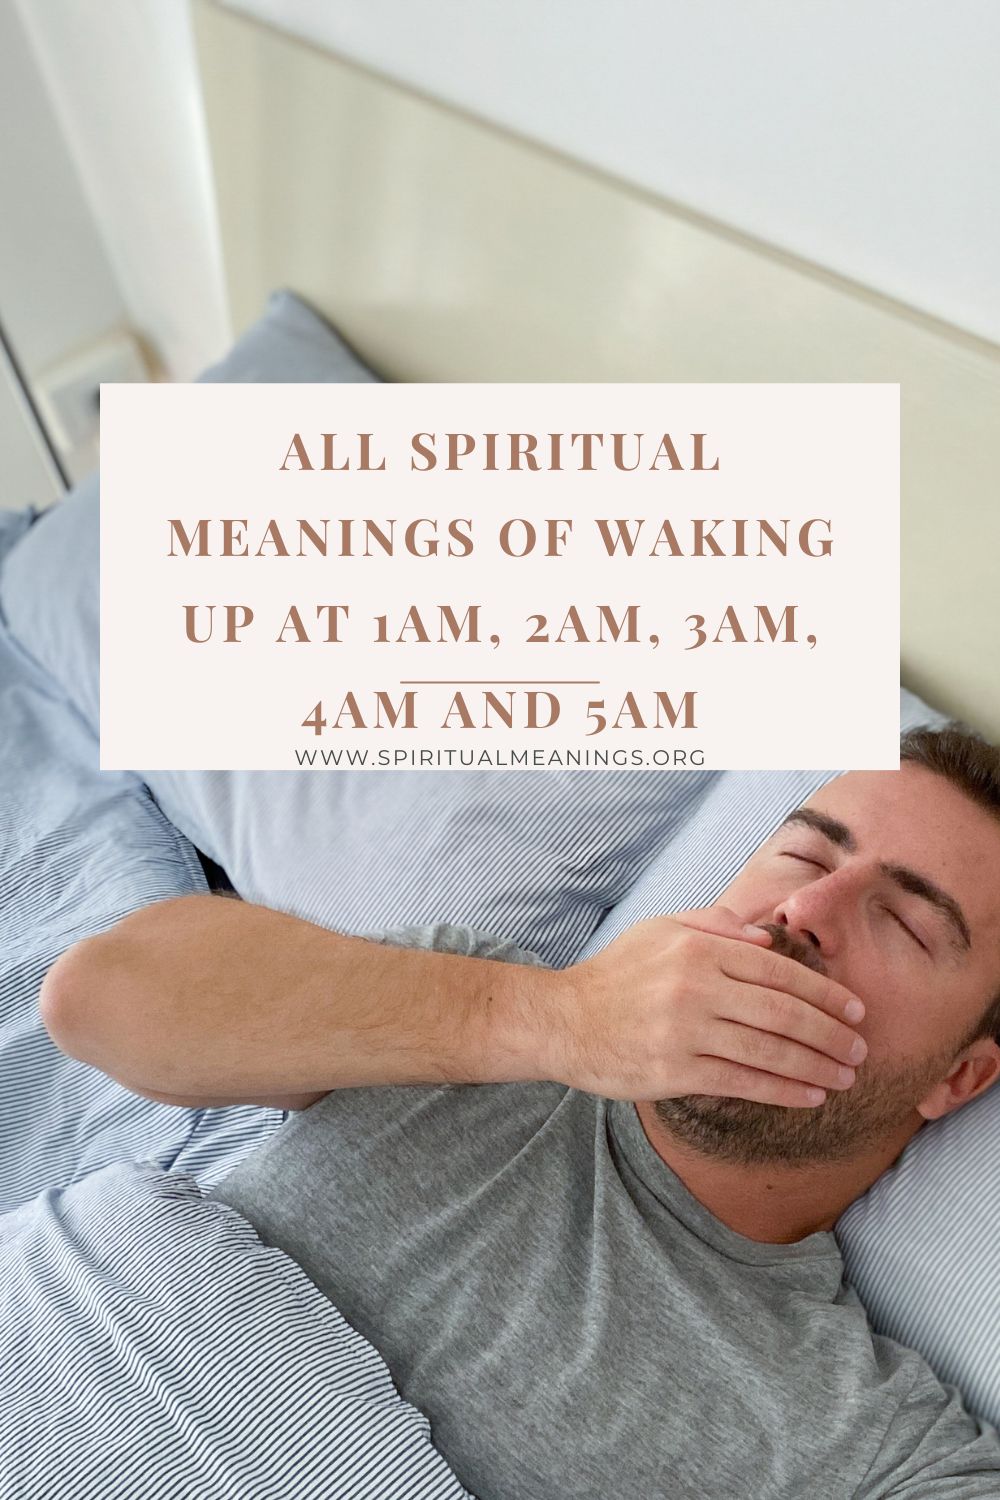 All Spiritual Meanings of Waking Up at 1am, 2am, 3am, 4am and 5am pin